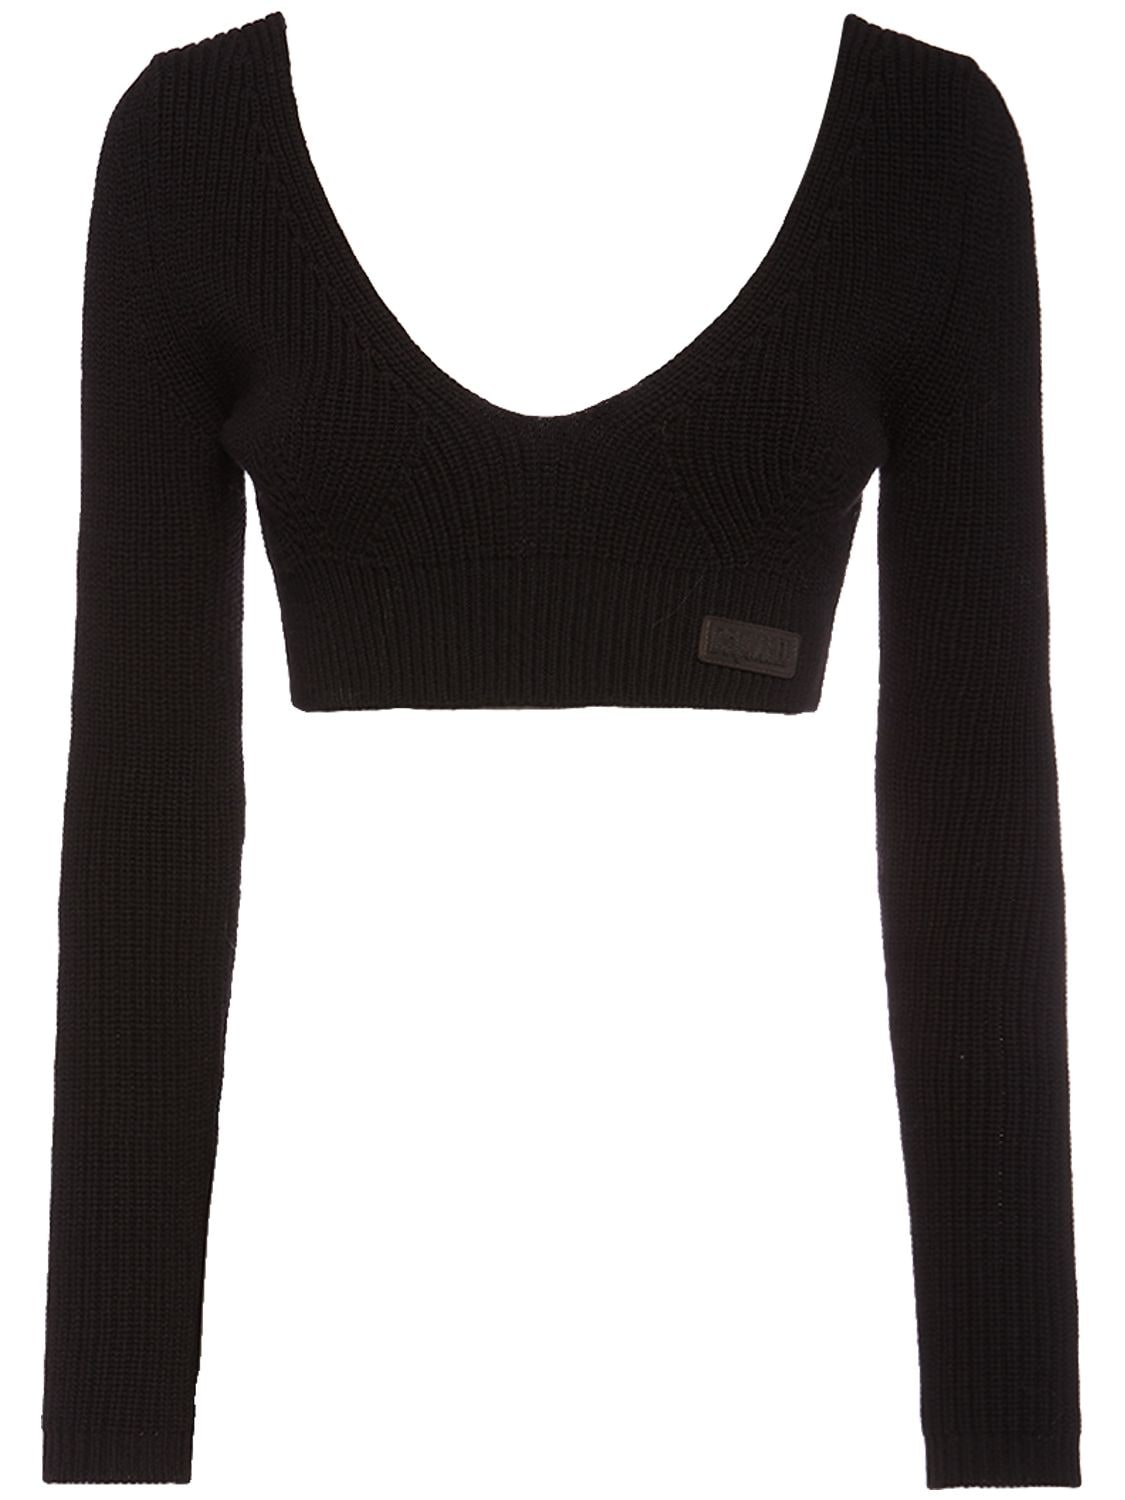 Shop For Ribbed Knit Long-Sleeve Crop Top